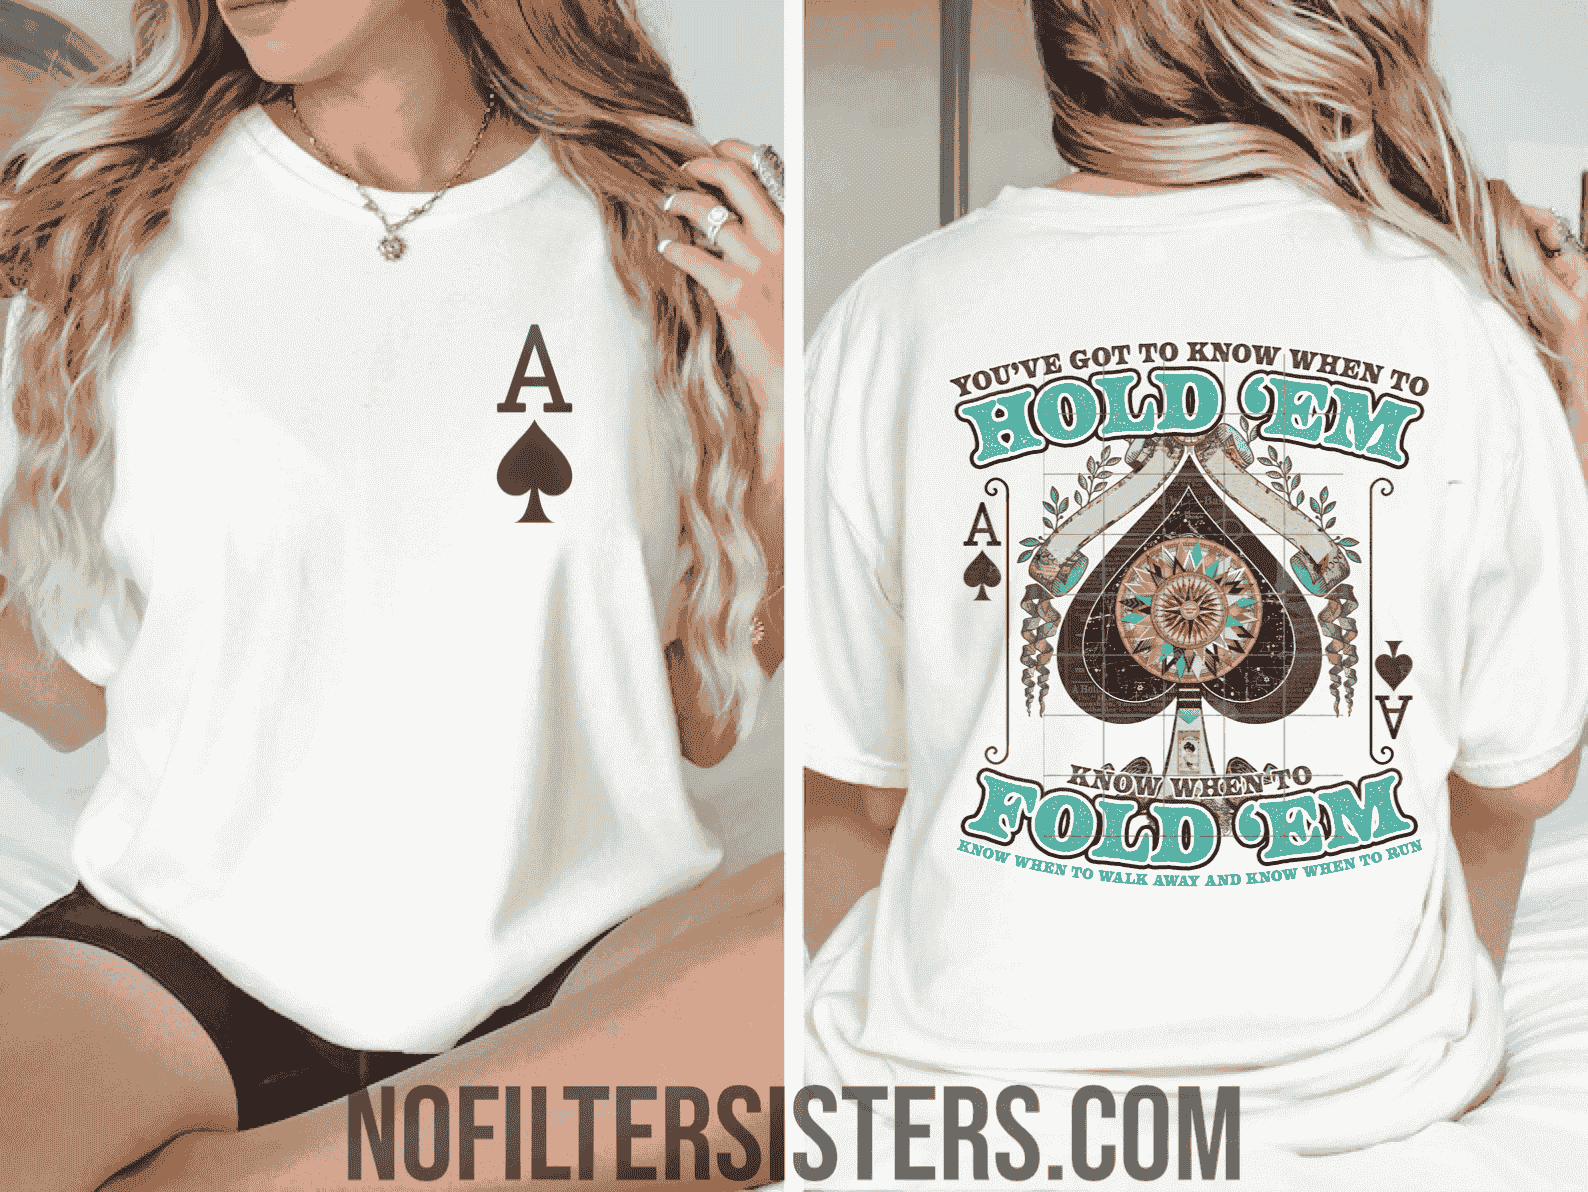 Hold ’em & Fold em’ Graphic T Shirt – a smart Unisex tee in sizes Small to 4XL!